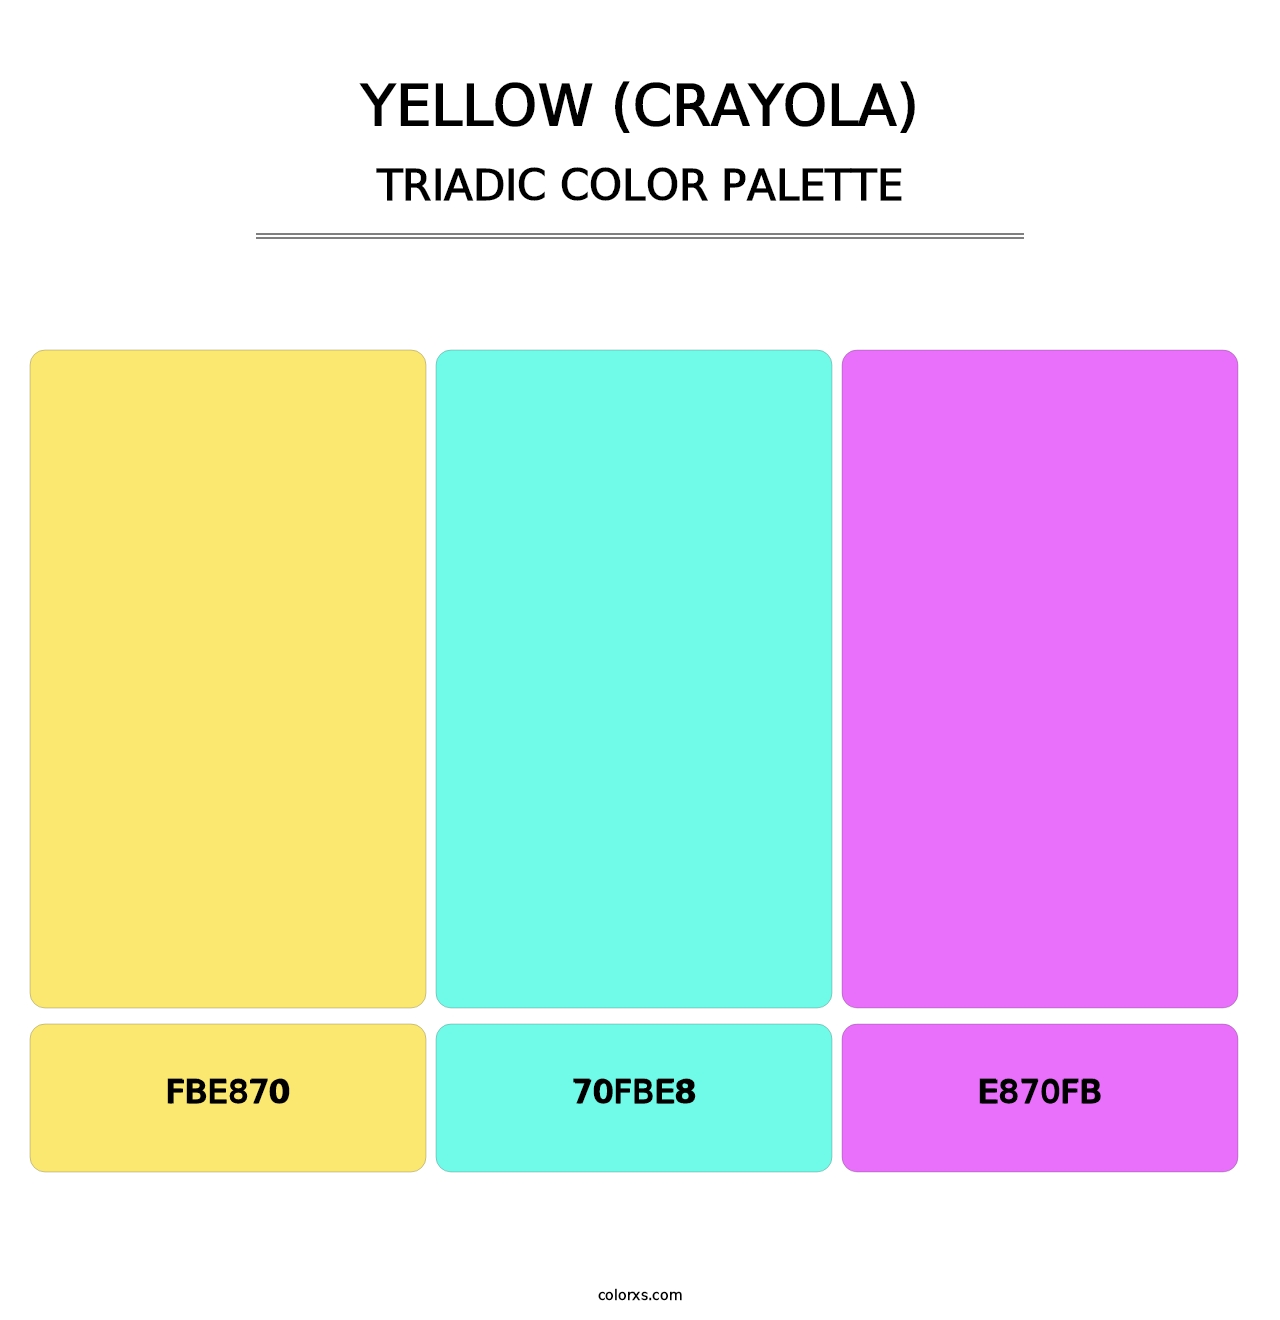 Yellow (Crayola) - Triadic Color Palette